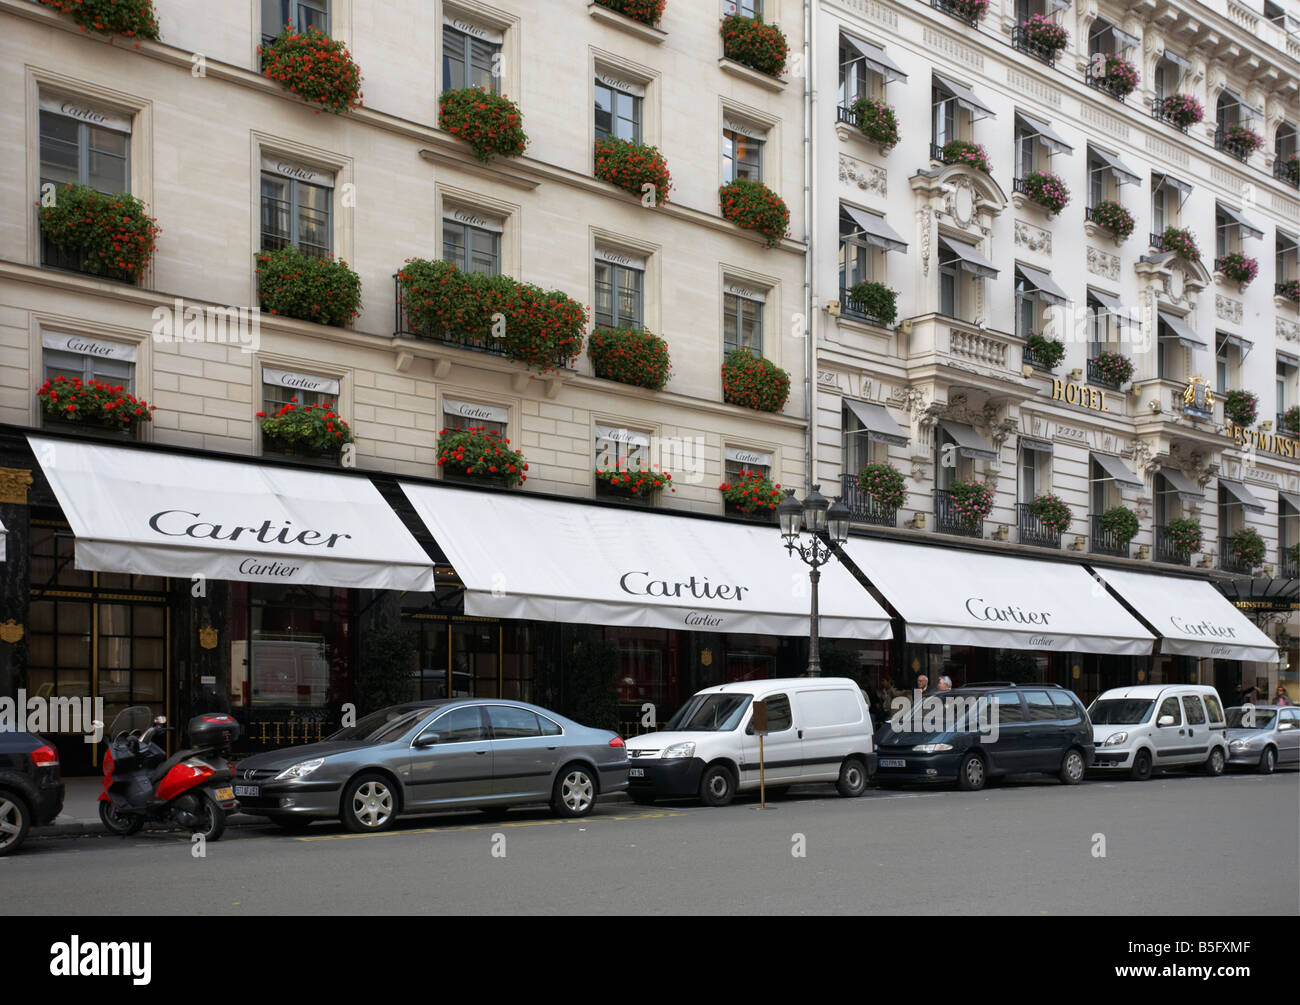 cartier in france